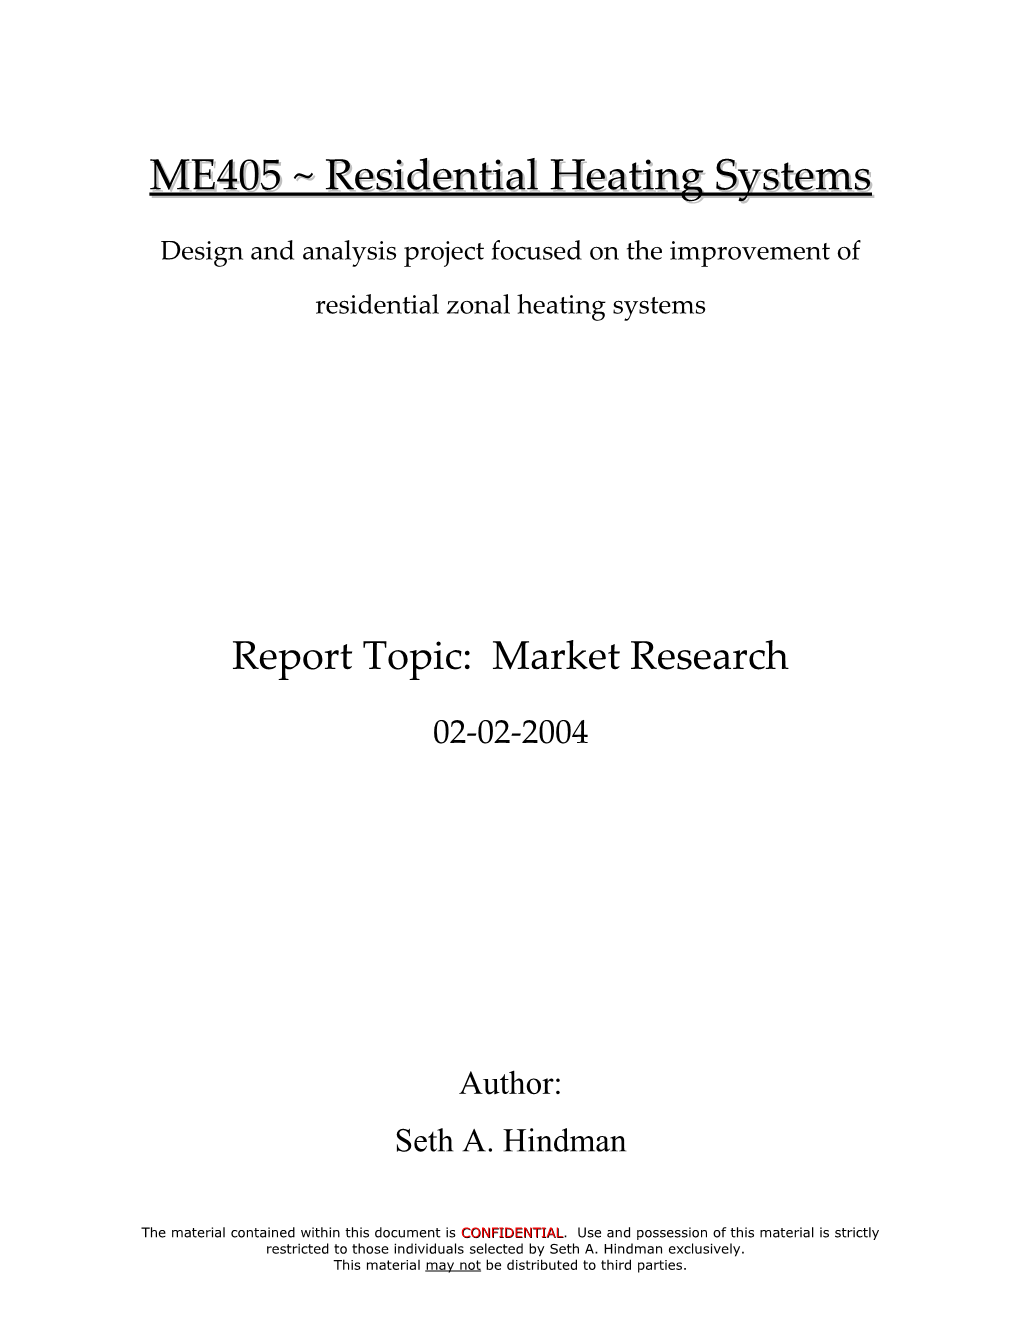 ME405 Residential Heating Systems